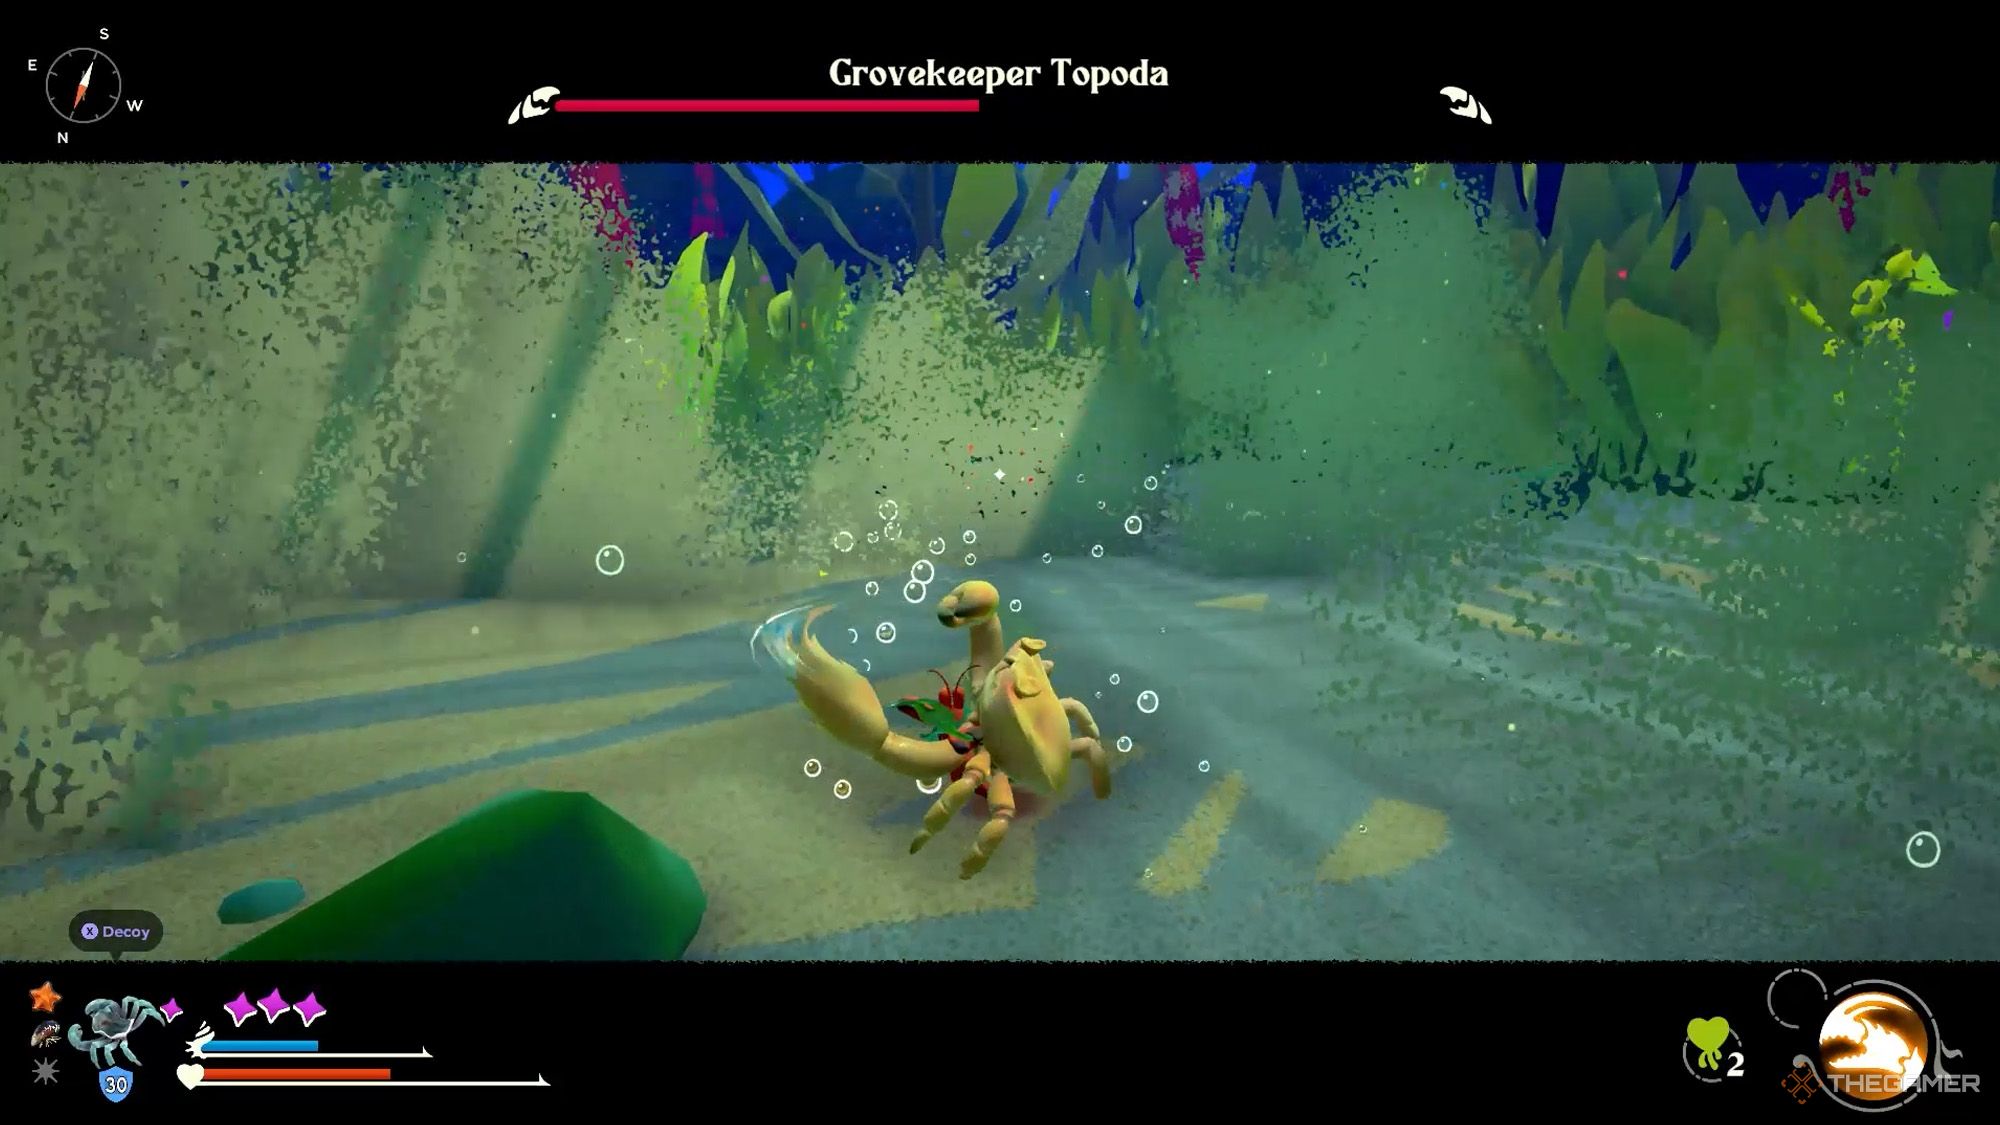 Another Crab's Treasure - Grovekeeper Topoda is used Speed Storm and disappeared